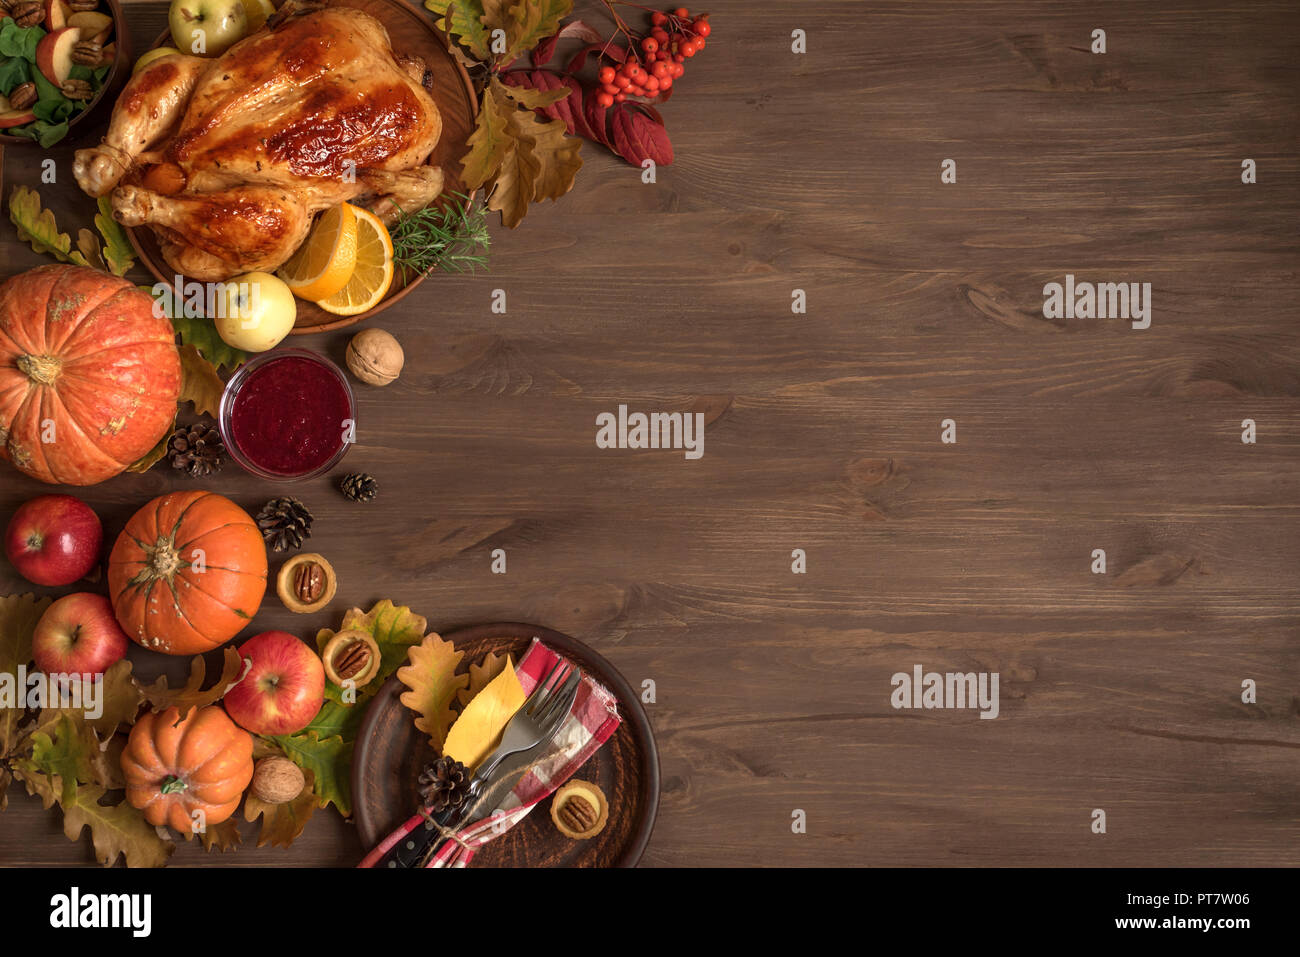 Thanksgiving dinner background with turkey, fall leaves, seasonal autumnal decor and table setting, top view, copy space. Stock Photo